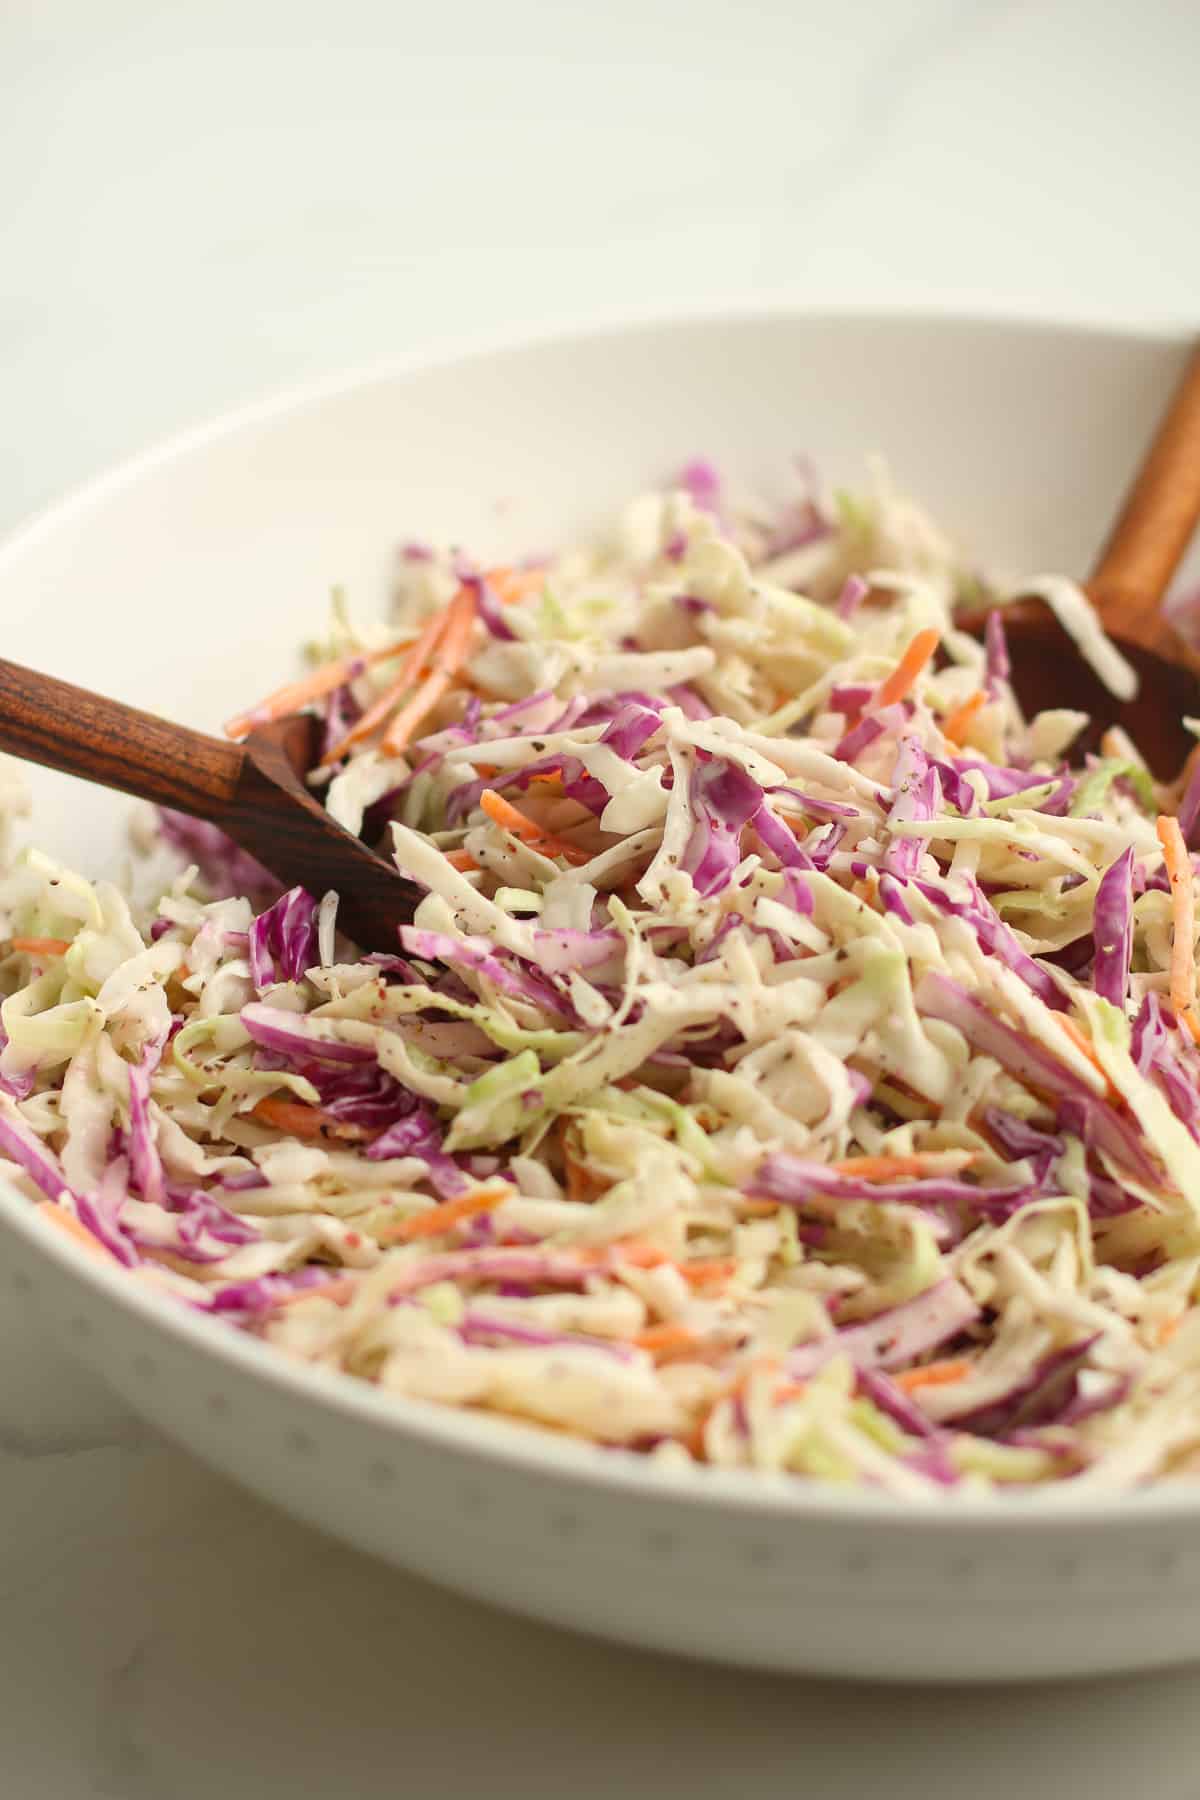 Side shot of a white bowl of creamy coleslaw with wooden spoons.